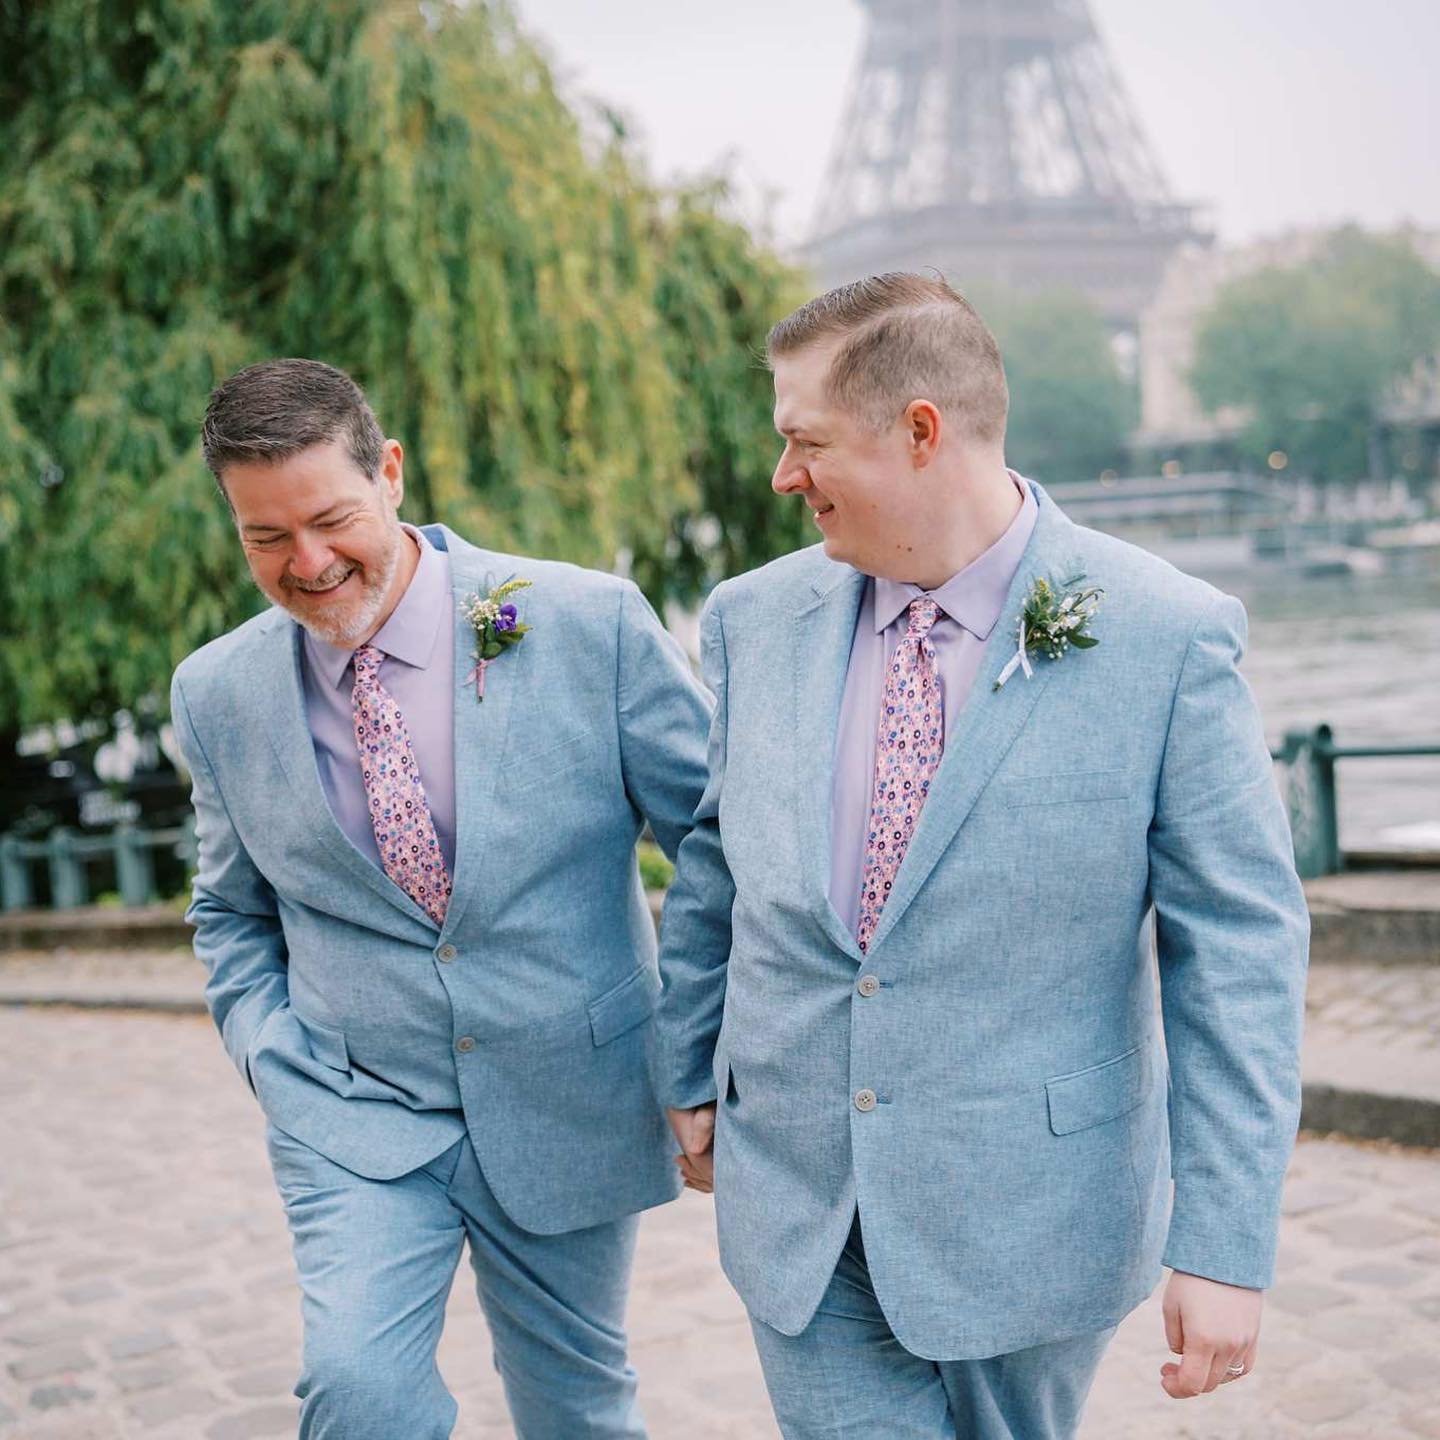 Just married! R and M in Paris full of love and happiness for one another! 

The mixed media? boutonni&egrave;res that are paper and real flowers 🌺 adorning their matching suits. I love their smiles!

#weddinginparis #weddingflowers #grooms #boutonn